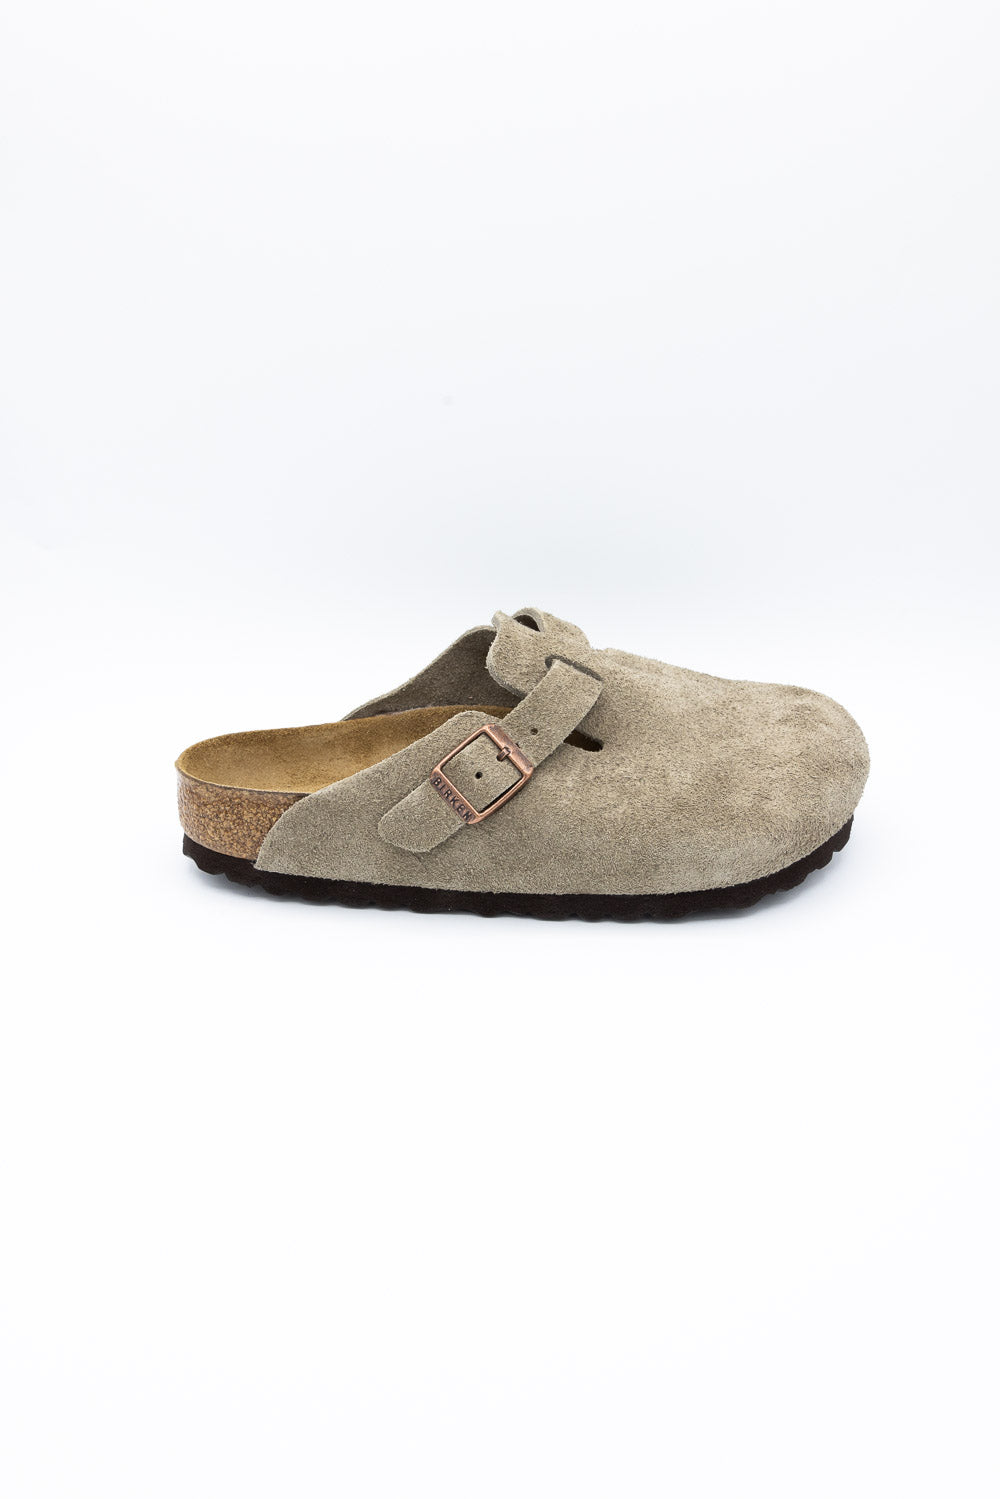 Birkenstock Boston Soft Footbed Suede Leather Clogs for Women in Taupe